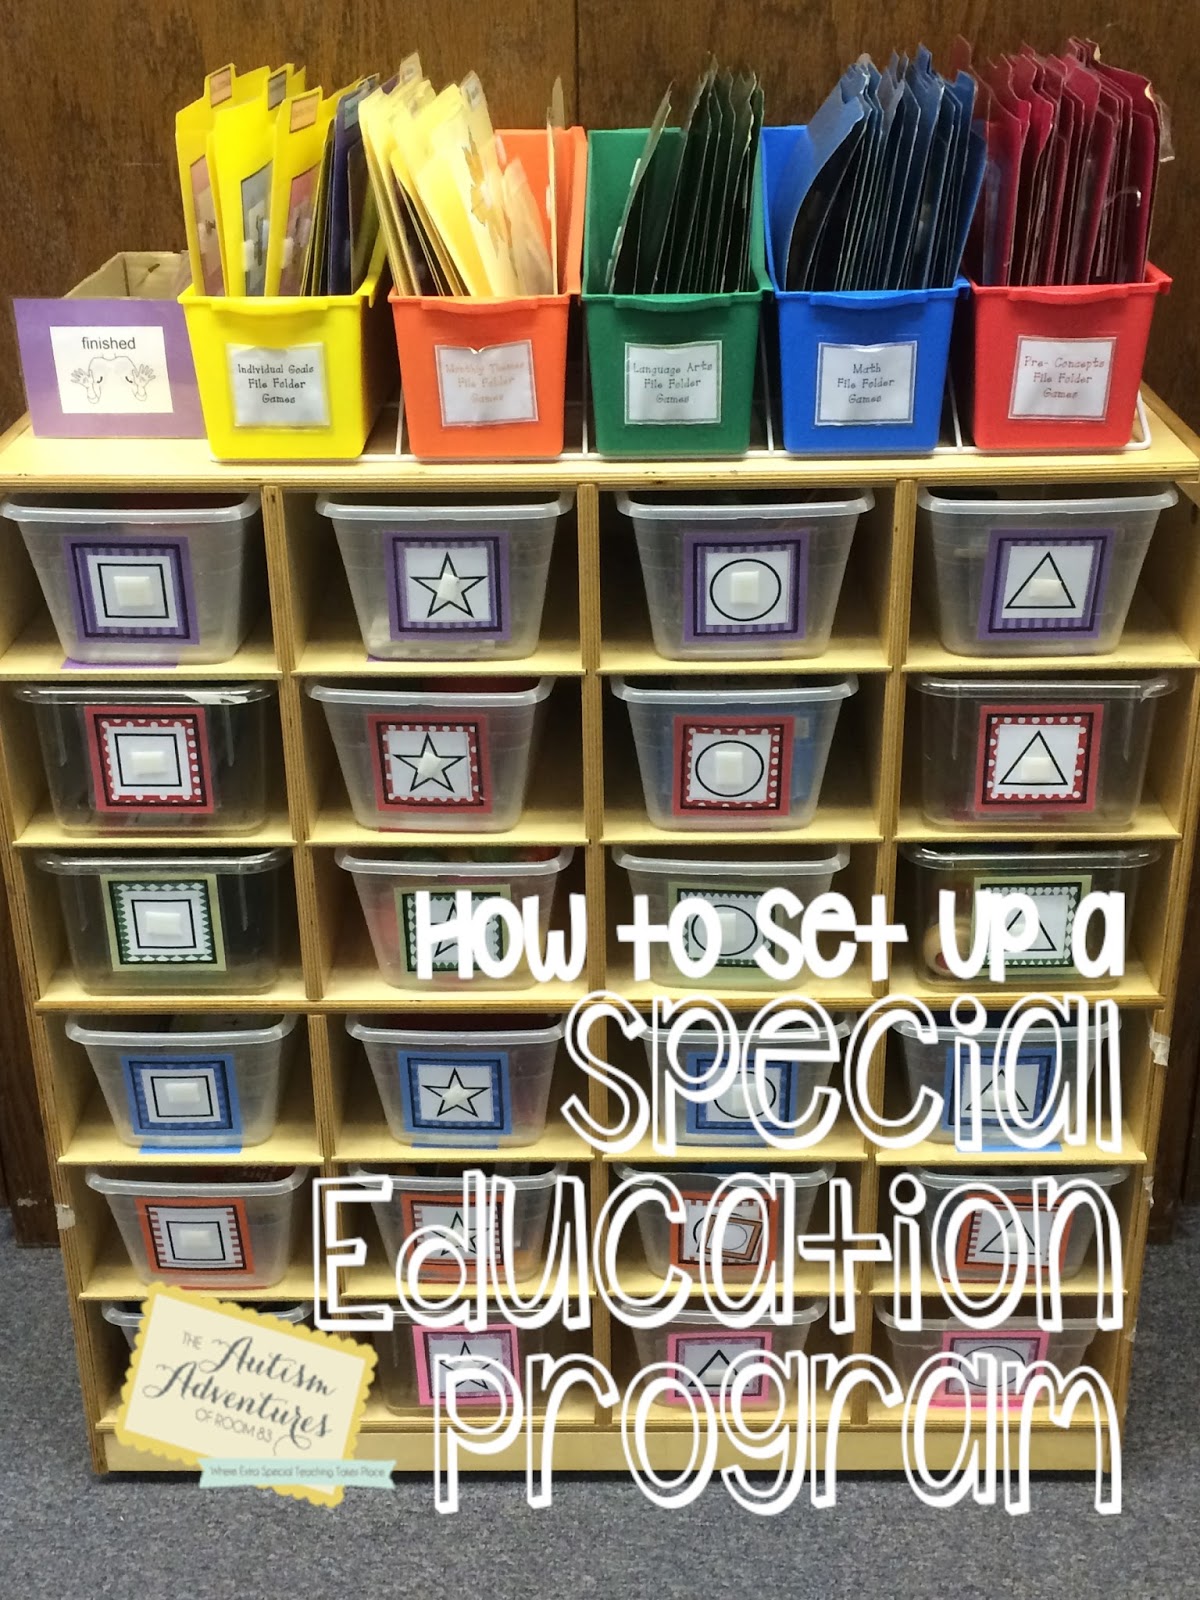 Setting Up Special Education Work Boxes for Independent Work Systems -  Autism Classroom Resources